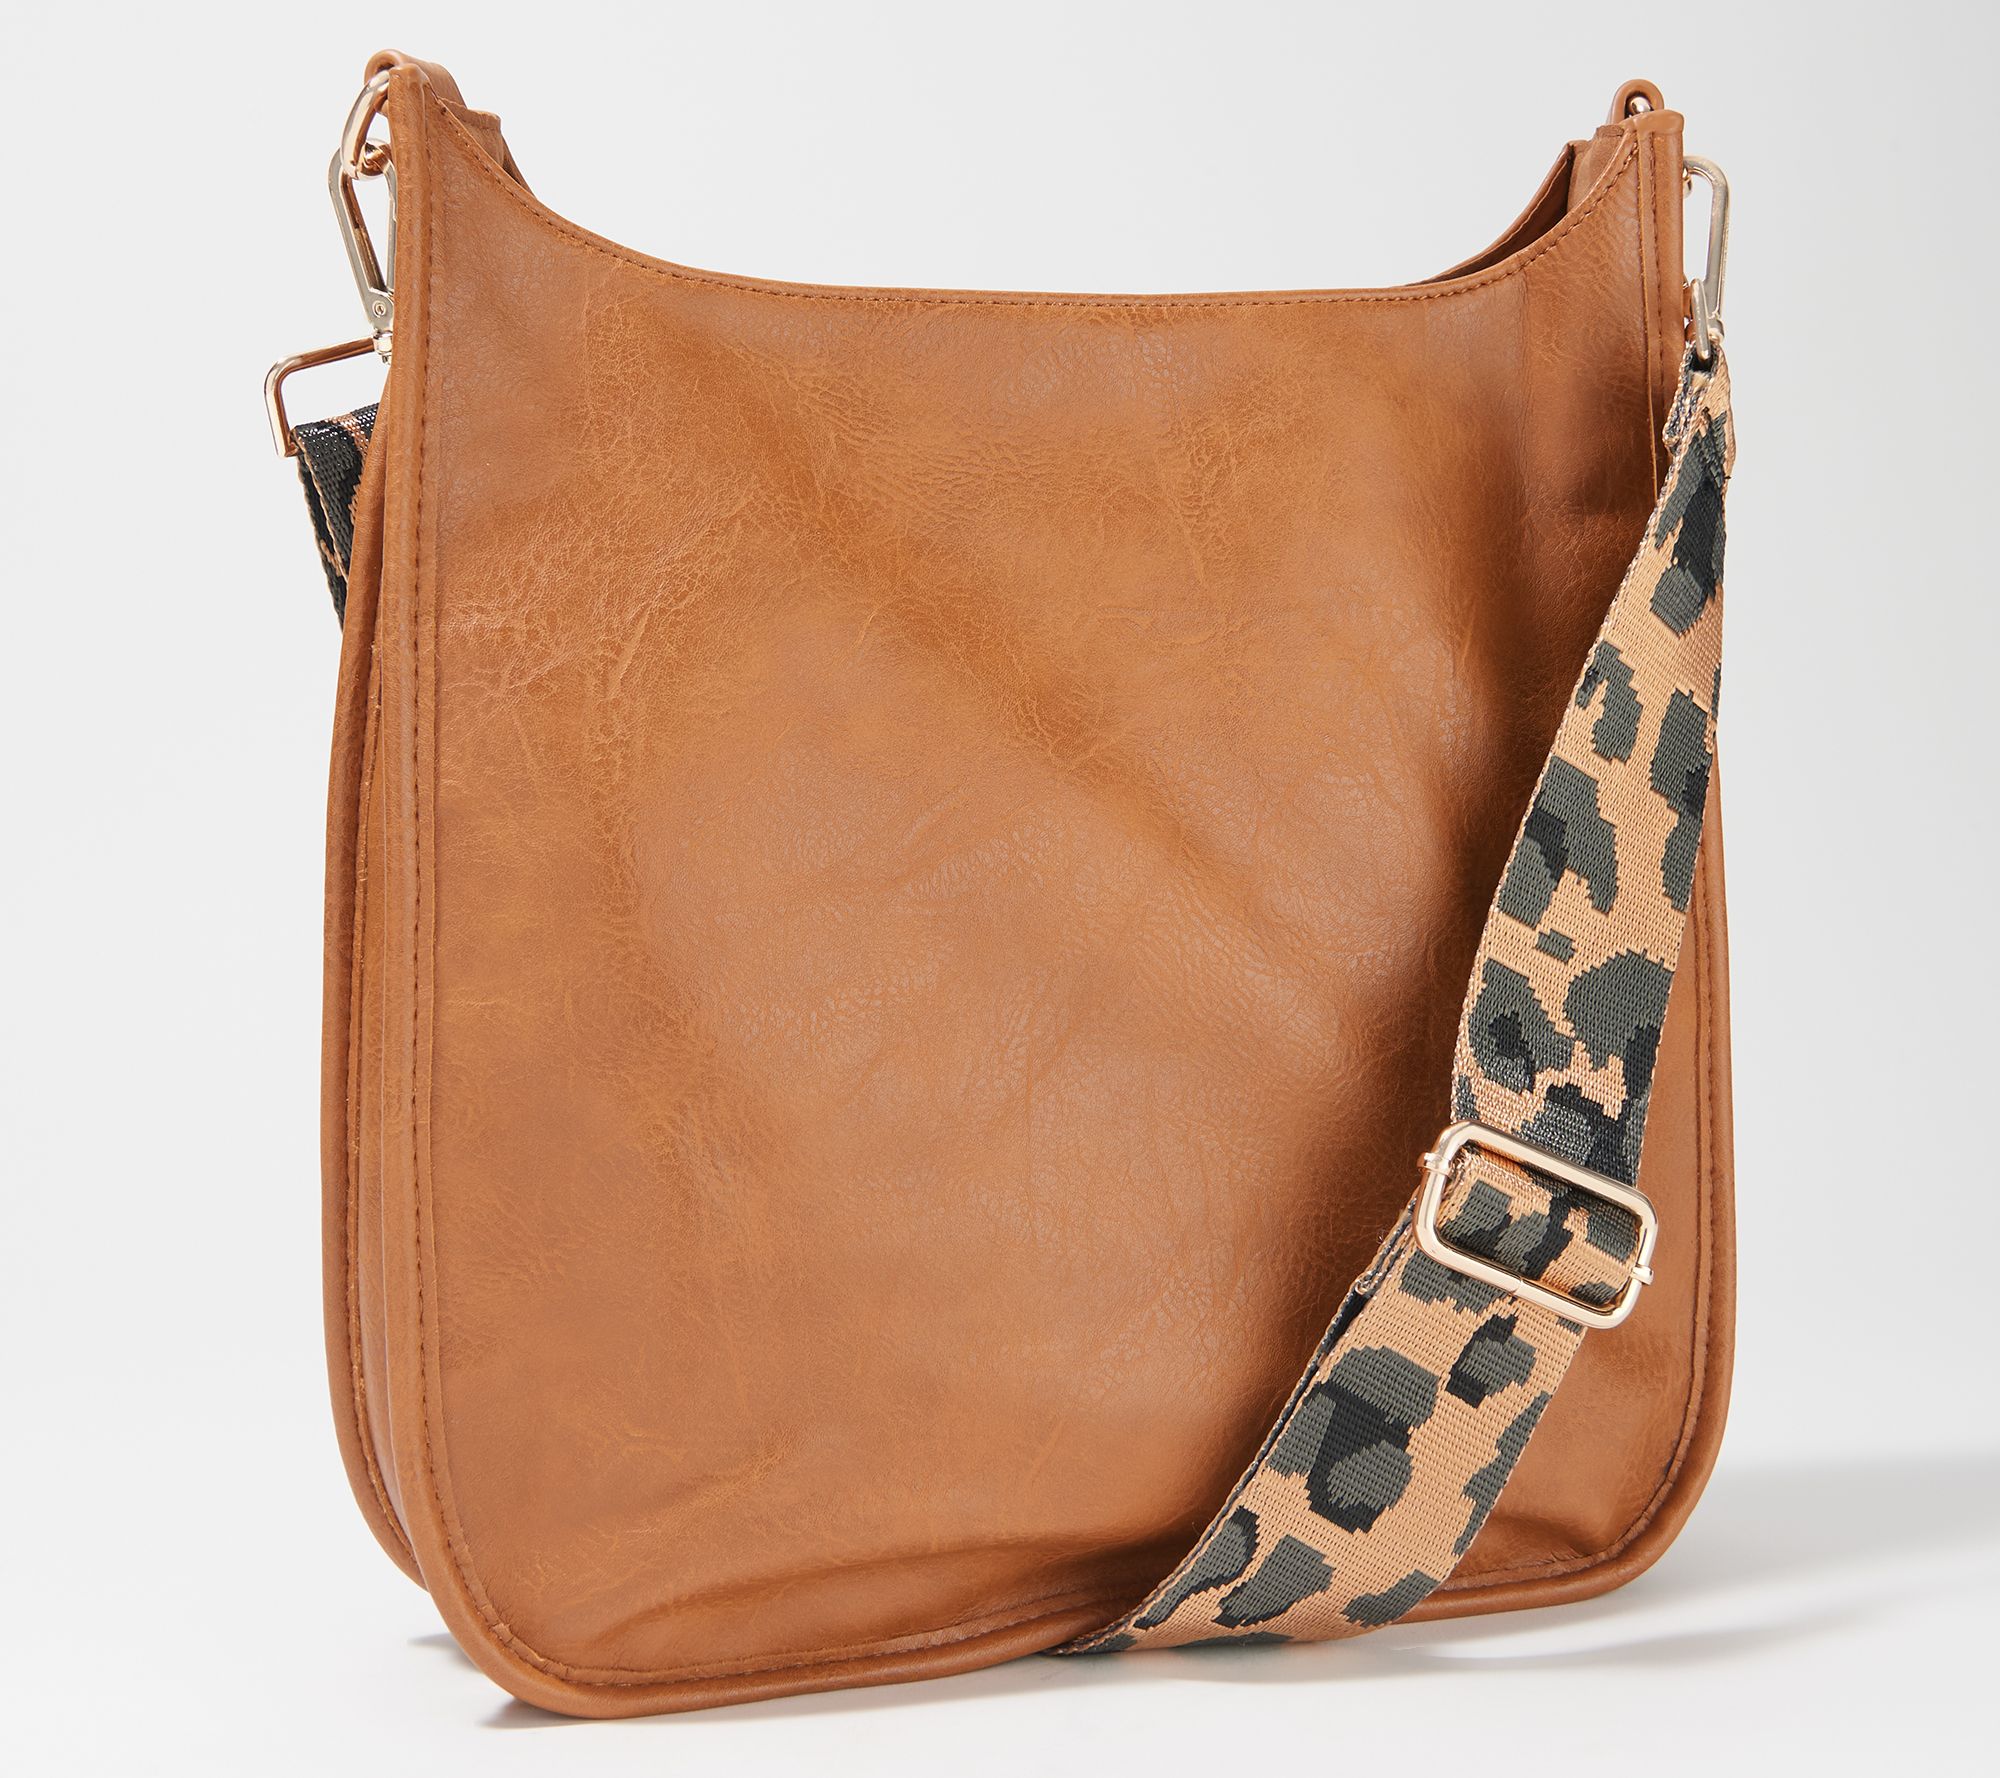 Ahdorned! Camel/ Faux Leather/ crossbody Bag Gold Hardware With Two Straps.